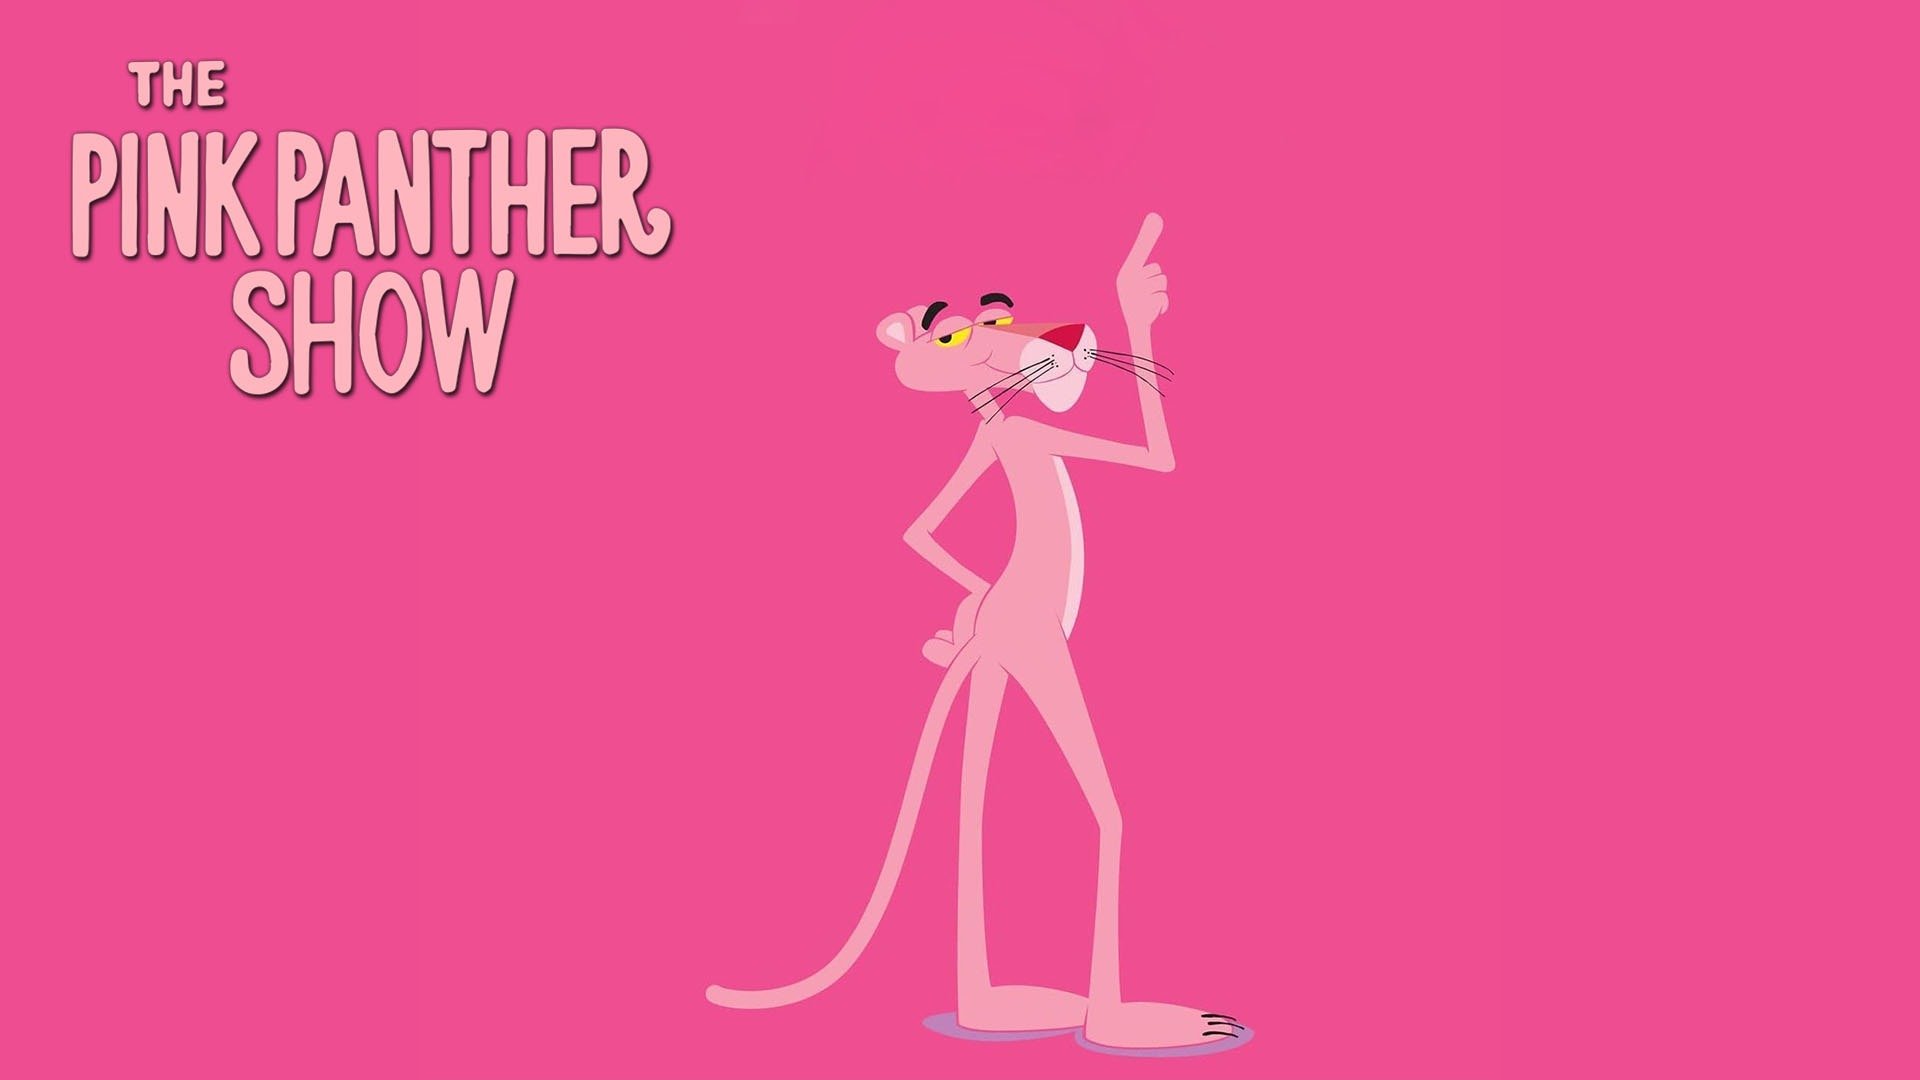 The Pink Panther Show - Rotten Tomatoes